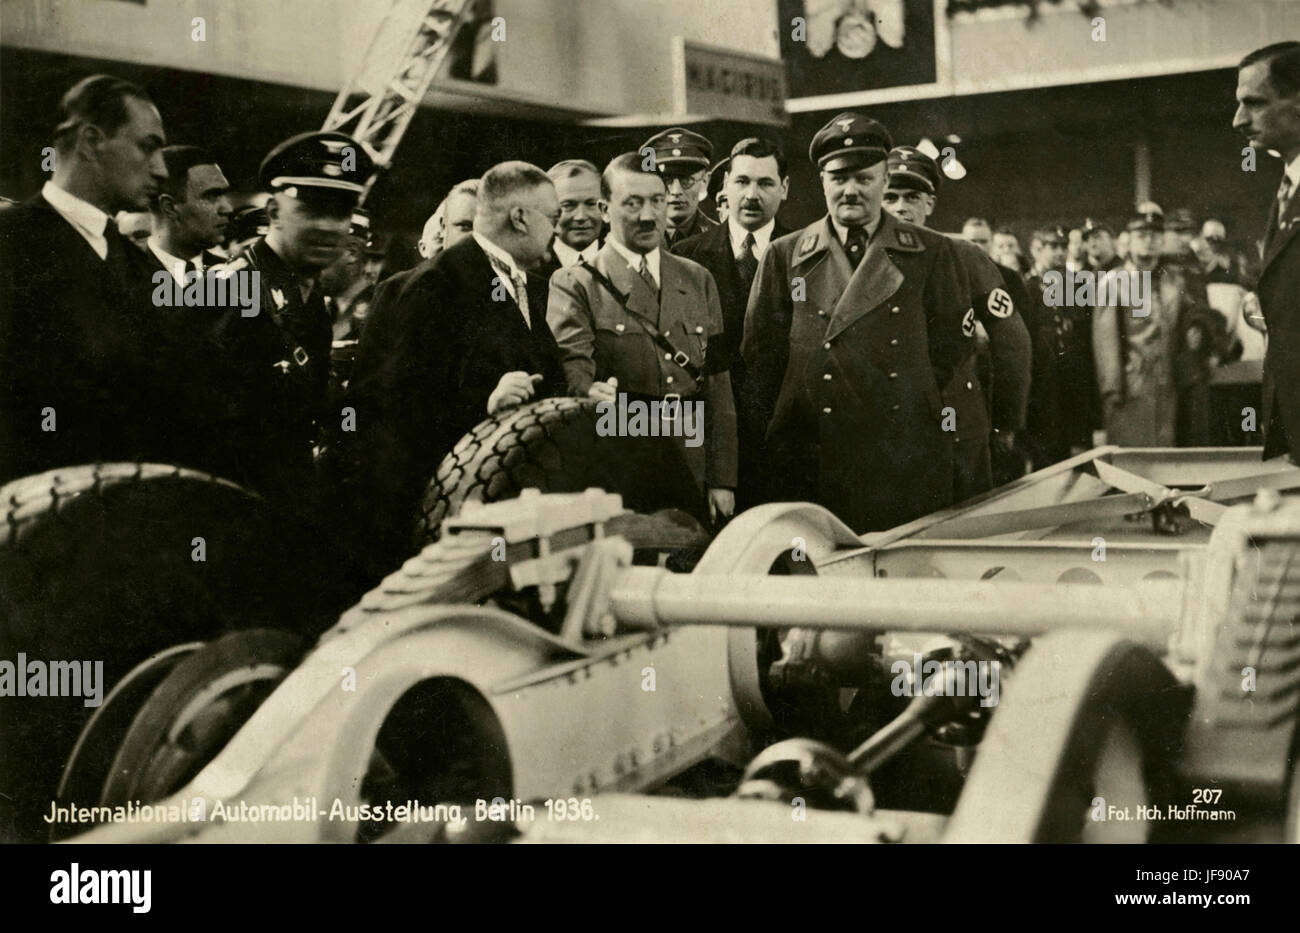 Adolf Hitler attending an International Exhibition of Automobiles in Berlin, 1936 Stock Photo